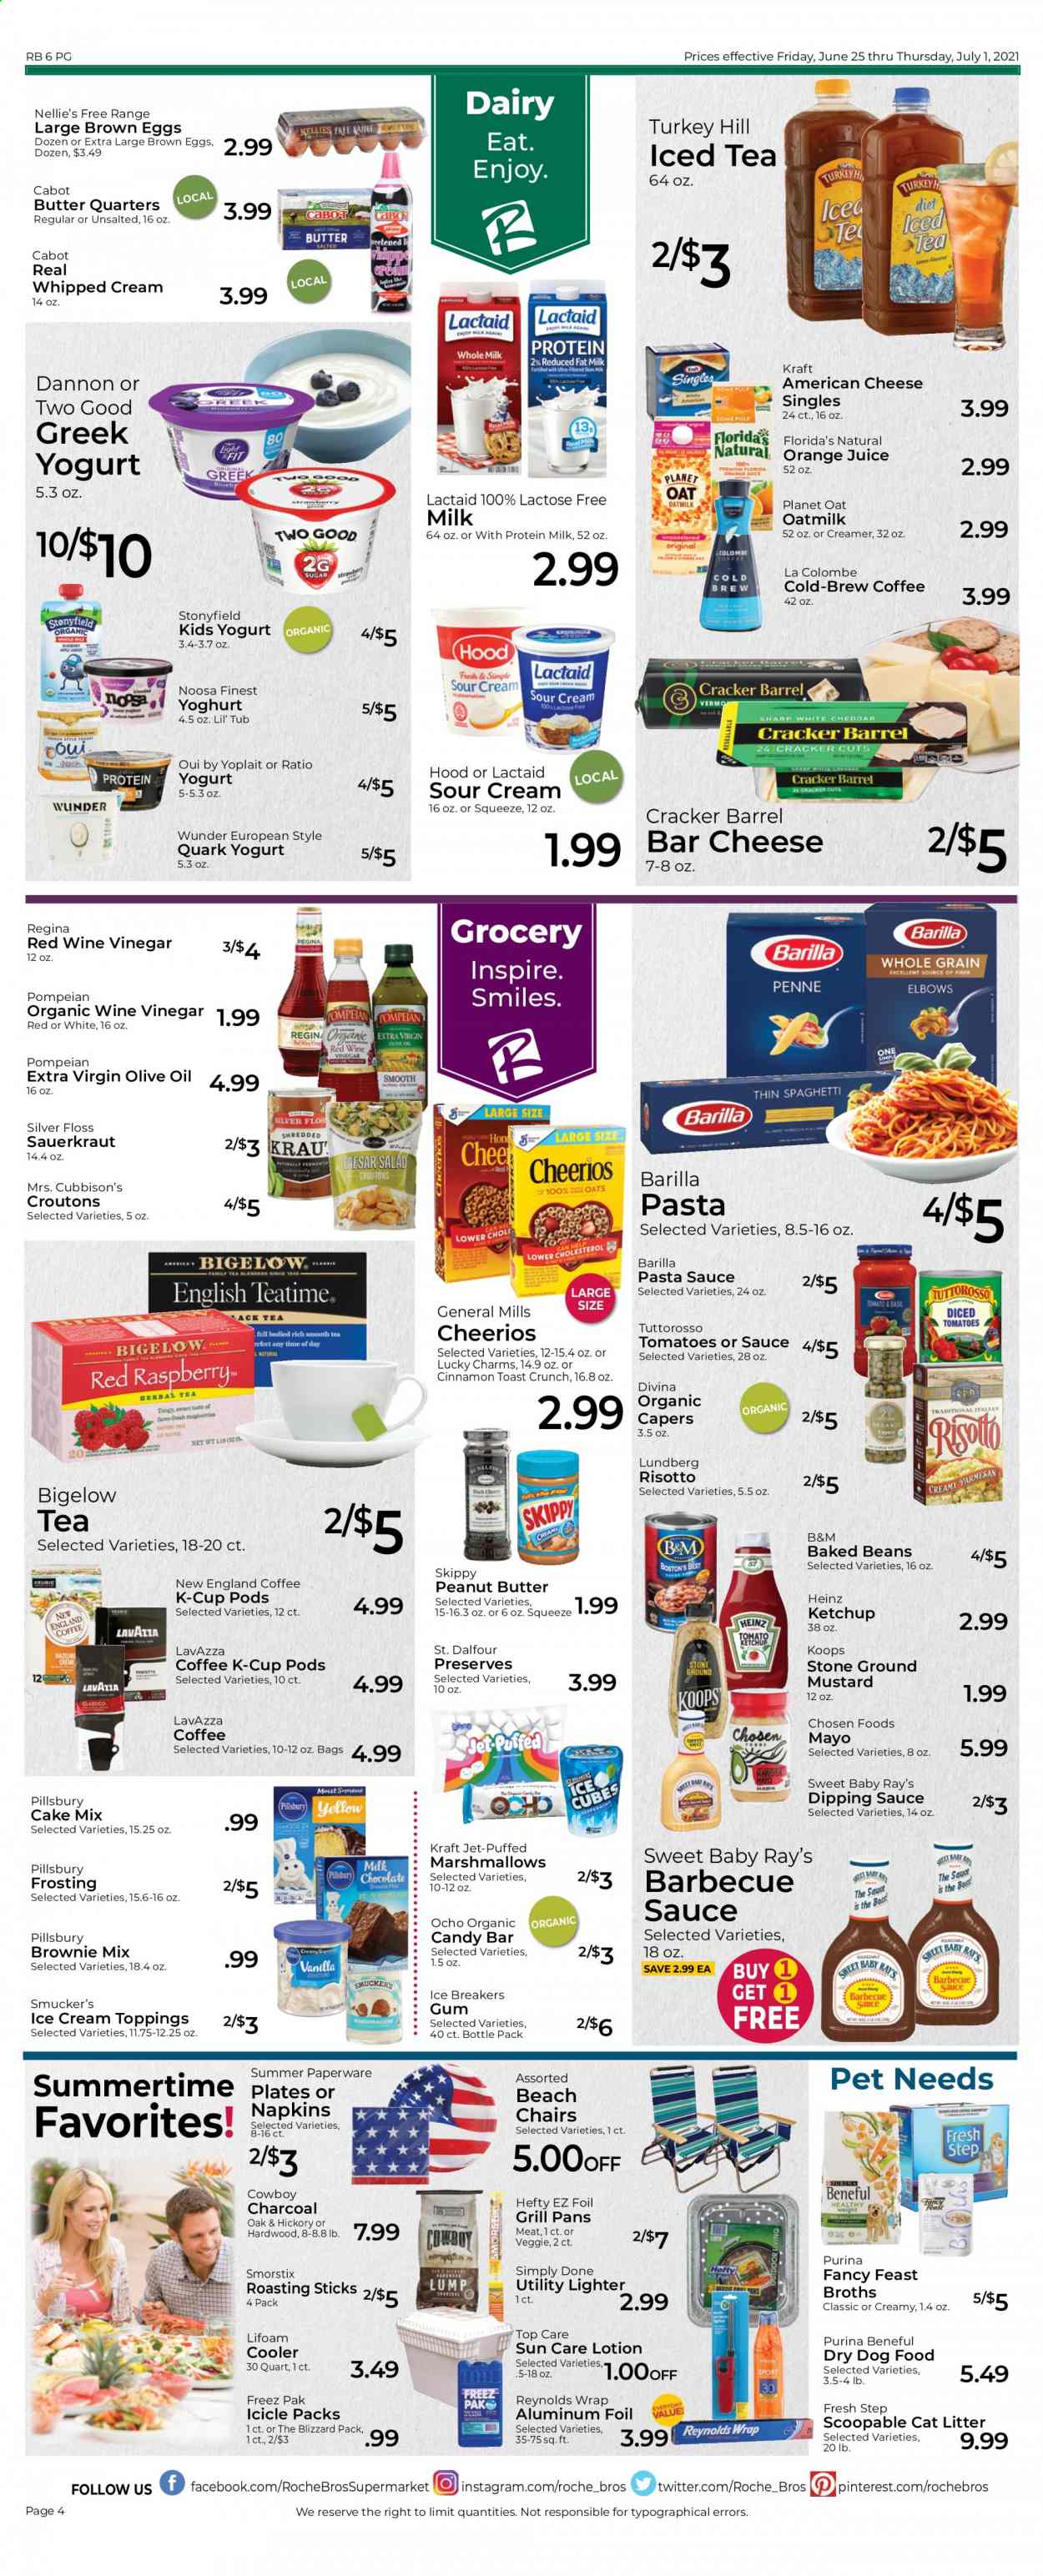 thumbnail - Roche Bros. Flyer - 06/25/2021 - 07/01/2021 - Sales products - brownie mix, cake mix, tomatoes, risotto, pasta sauce, Pillsbury, Barilla, Kraft®, american cheese, Lactaid, cheese, greek yoghurt, yoghurt, Yoplait, Dannon, milk, oat milk, eggs, sour cream, whipped cream, creamer, mayonnaise, ice cream, marshmallows, crackers, Florida's Natural, croutons, frosting, oats, capers, sauerkraut, Heinz, baked beans, Cheerios, cinnamon, BBQ sauce, mustard, ketchup, extra virgin olive oil, vinegar, wine vinegar, olive oil, peanut butter, orange juice, juice, ice tea, coffee, coffee capsules, K-Cups, Lavazza, napkins, Jet, body lotion, Hefty, cat litter, animal food, dog food, Purina, dry dog food, Fancy Feast, Fresh Step. Page 4.